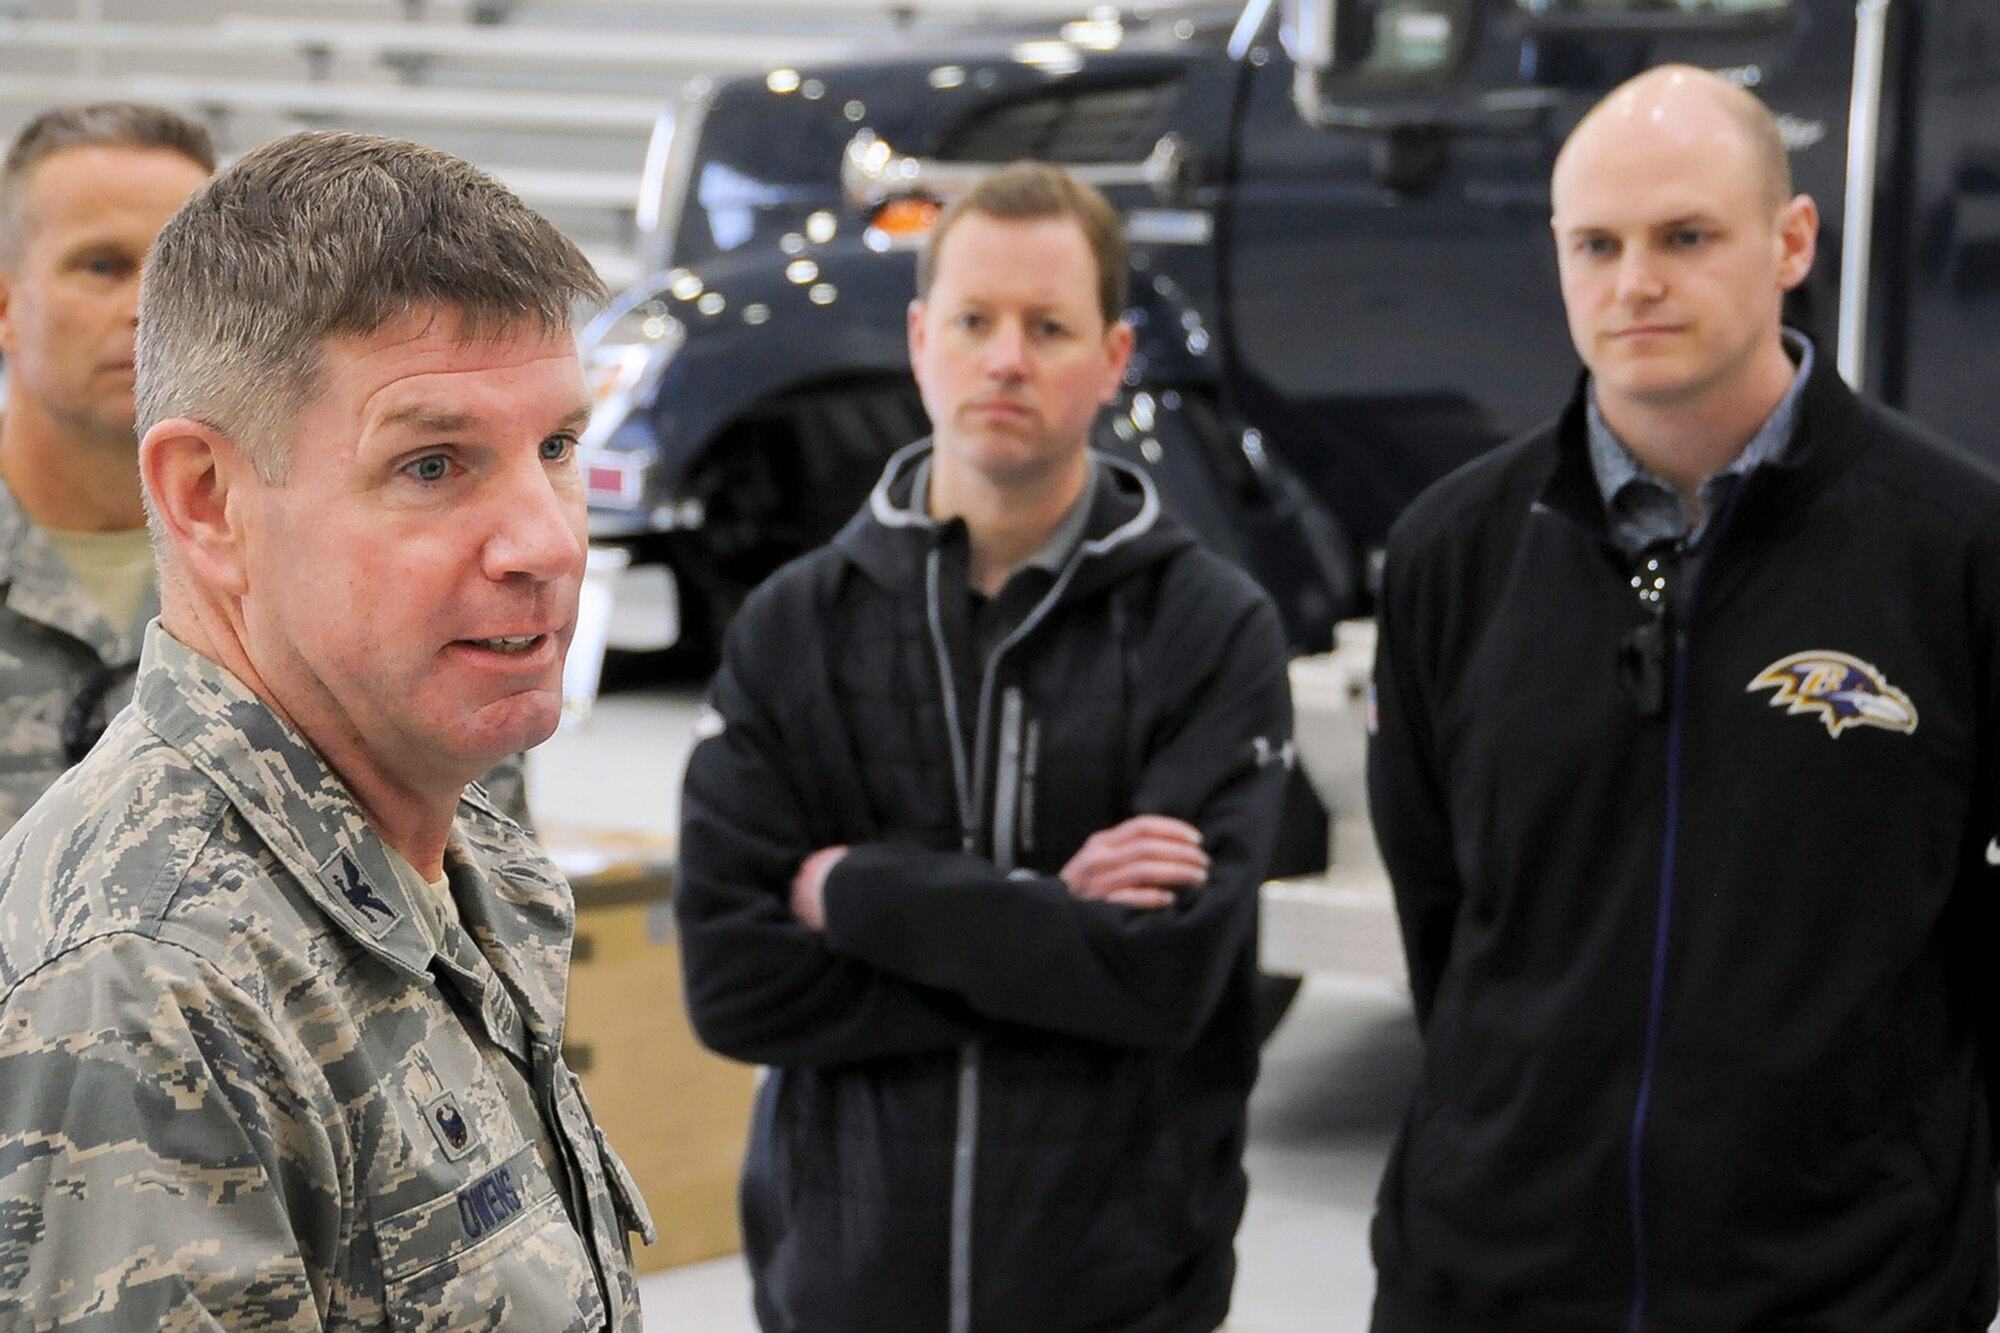 Colonel David A. Owens, 459th Air Refueling Wing commander, briefs Baltimore Ravens staff members on the 459th ARW mission during a tour on the Joint Base Andrews, Maryland, flight line March 7, 2016. The 459th showcased missions to the group such as inflight refueling, maintenance, aerial port and aeromedical evacuation. (U.S. Air Force photo/Staff Sgt. Kat Justen)